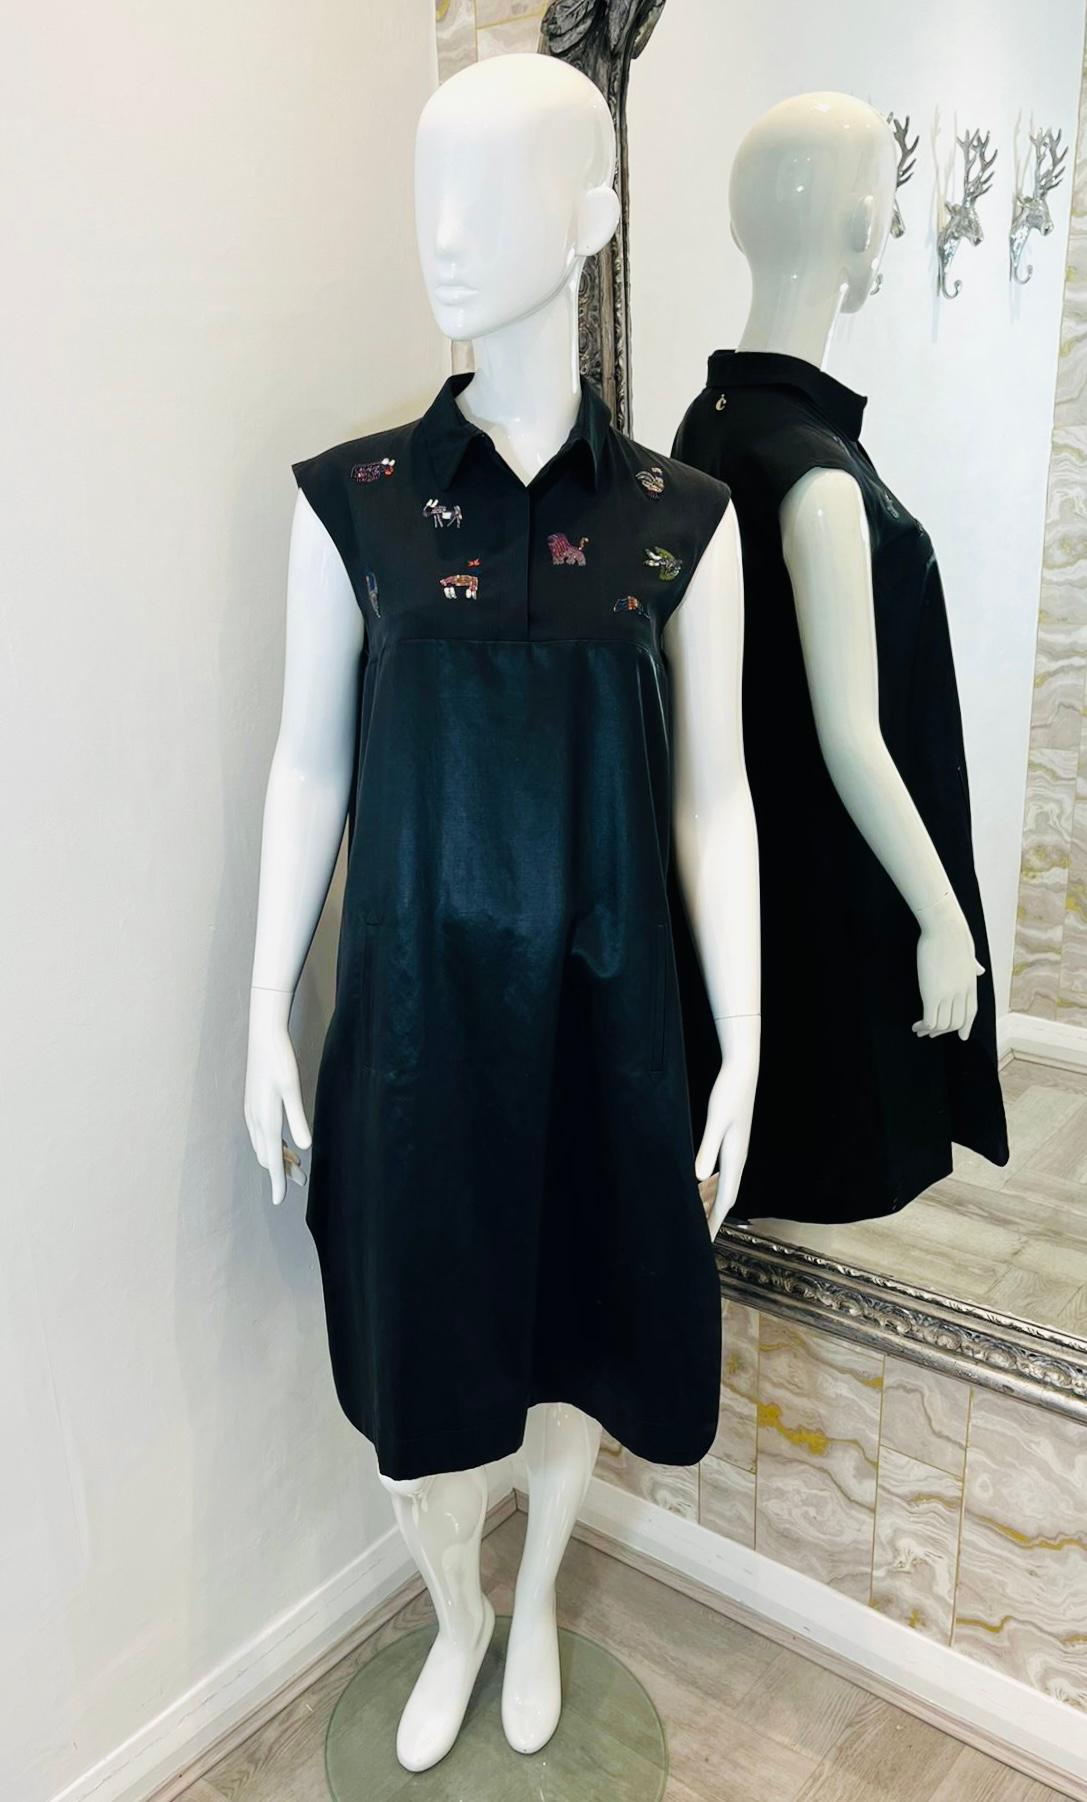 Carven Embroidered Silk & Cotton Dress

Black, sleeveless dress designed with shirt style, collared top detailed with multicoloured, crafted with beads and threads animals embroidery.

Featuring empire silhouette with plain, loose fit skirt styled